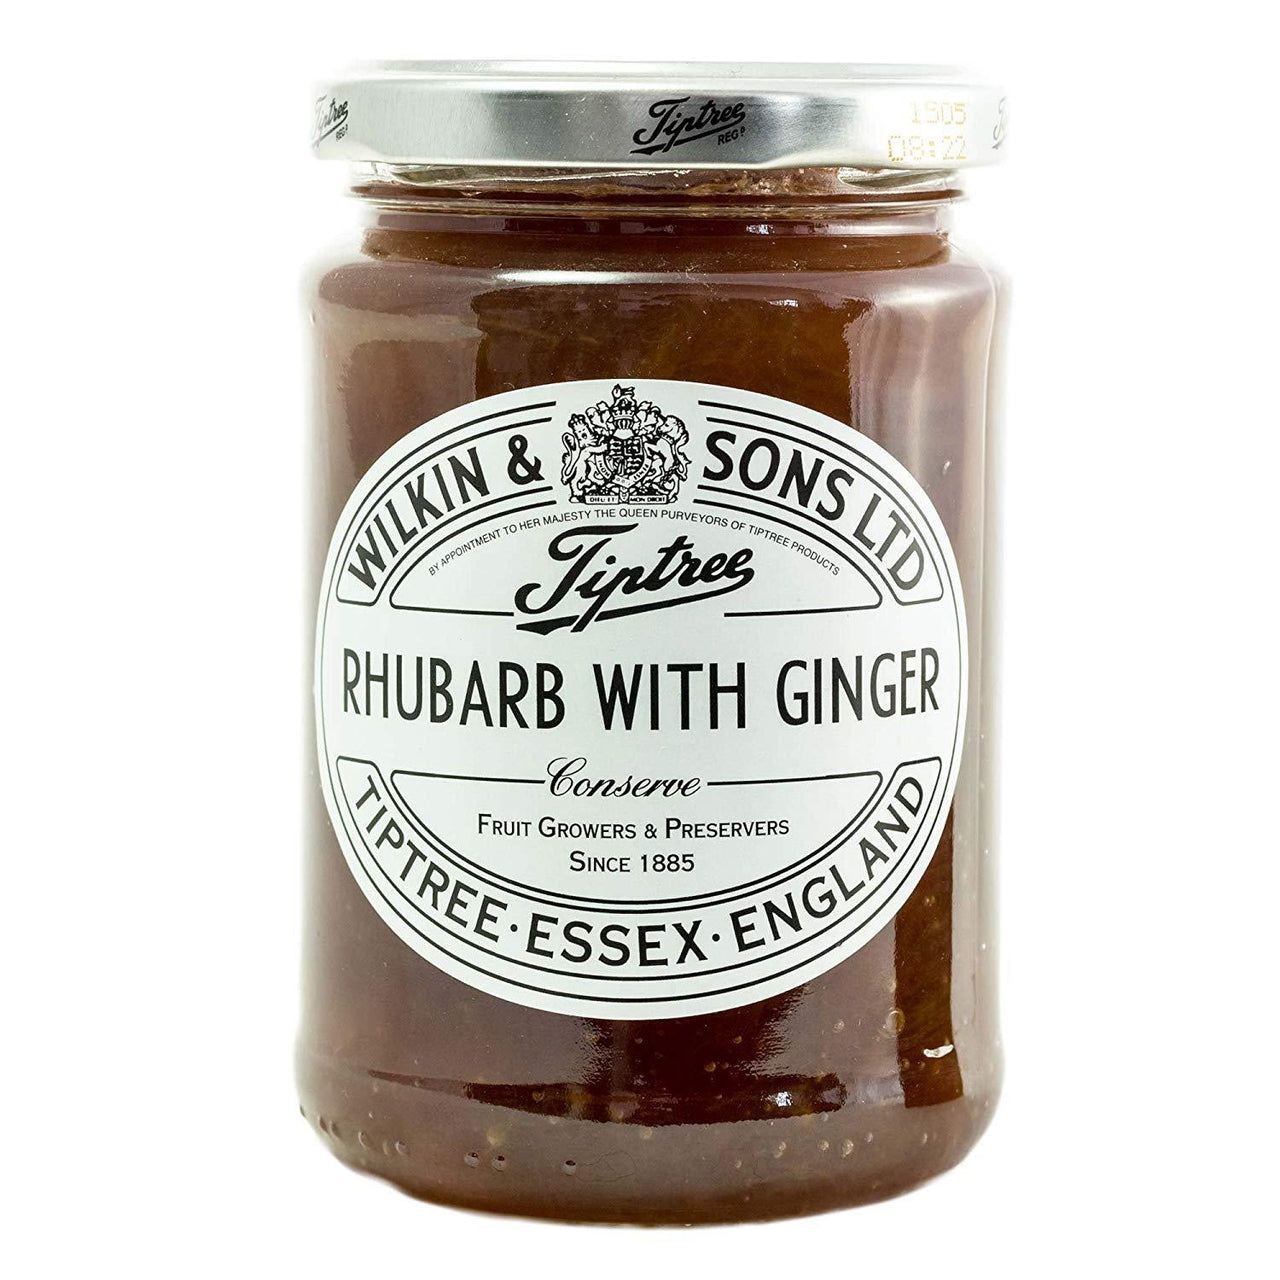 Tiptree Rhubarb With Ginger